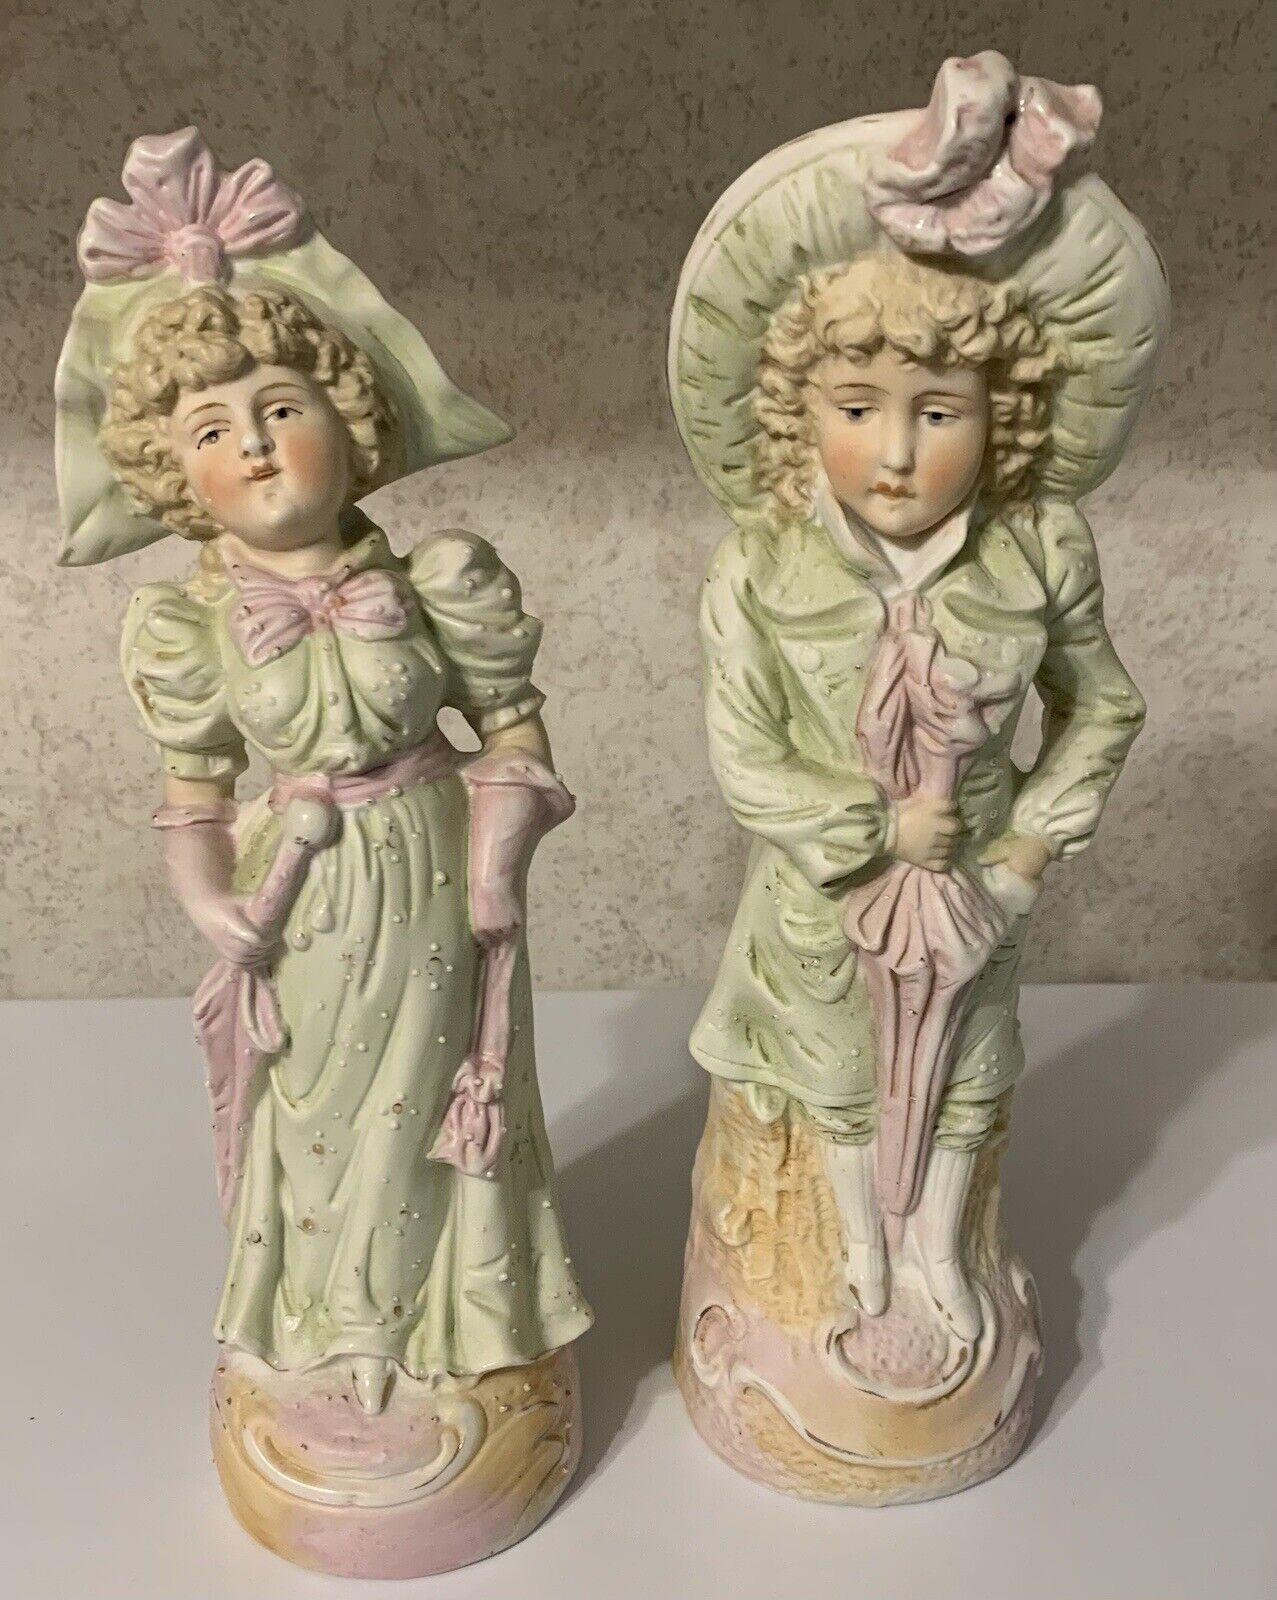 FREE SHIPPING EXCELLENT RARE NUMBERED MATCHING VINTAGE 19TH CENTURY FIGURINES